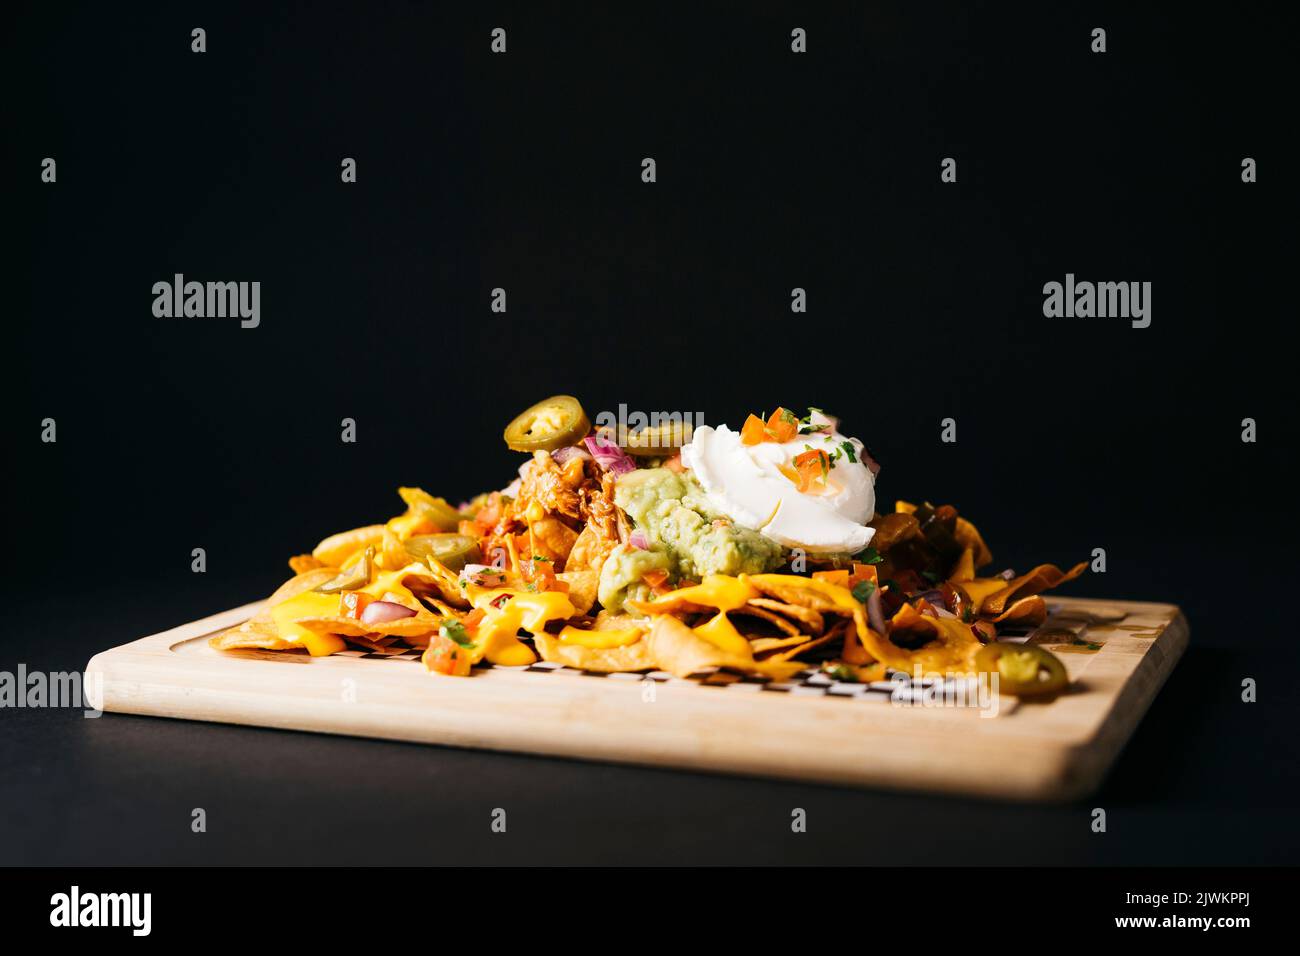 Nachos topped with melted cheese and other savory toppings over a black background Stock Photo